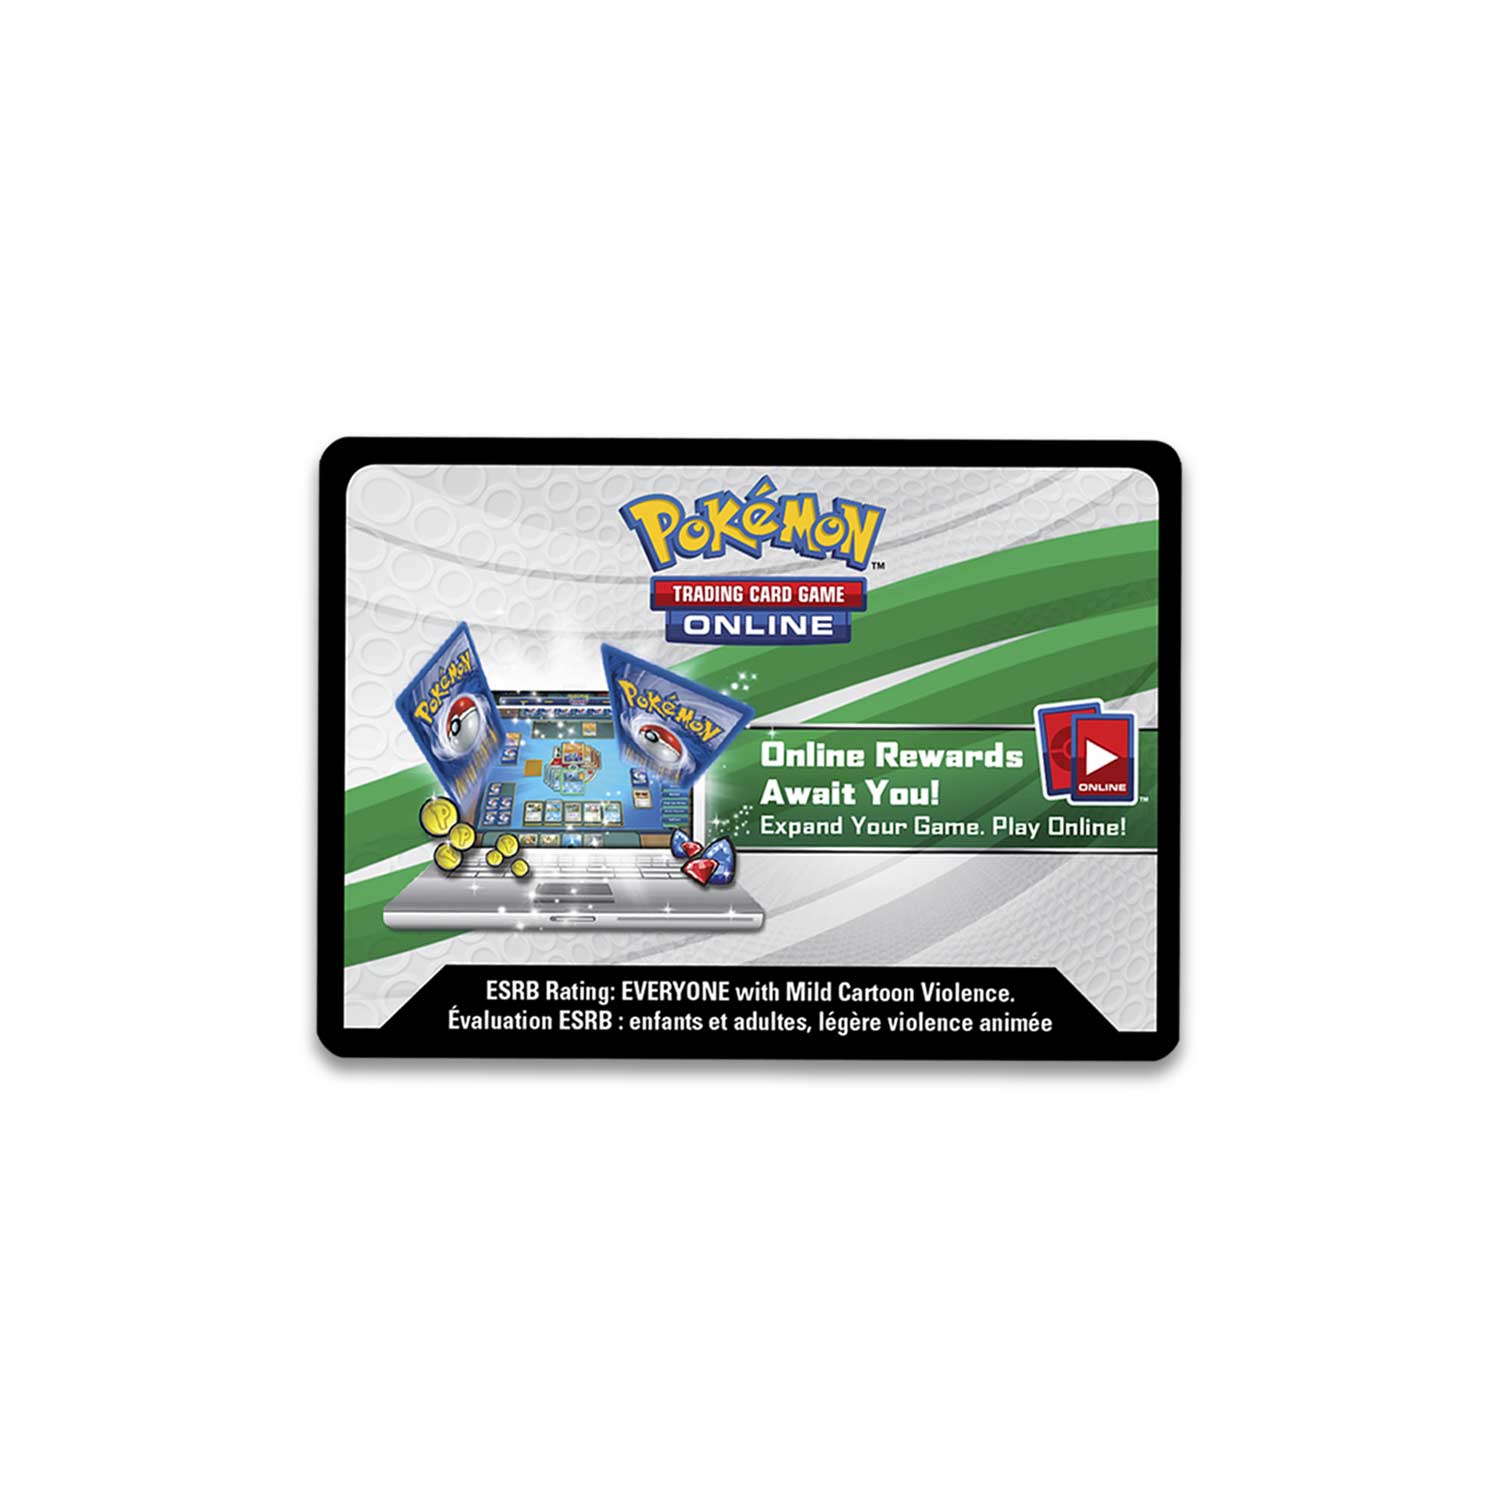 Image of a code card that is included with the Elite Trainer Box. This card can be used for the online TCG.